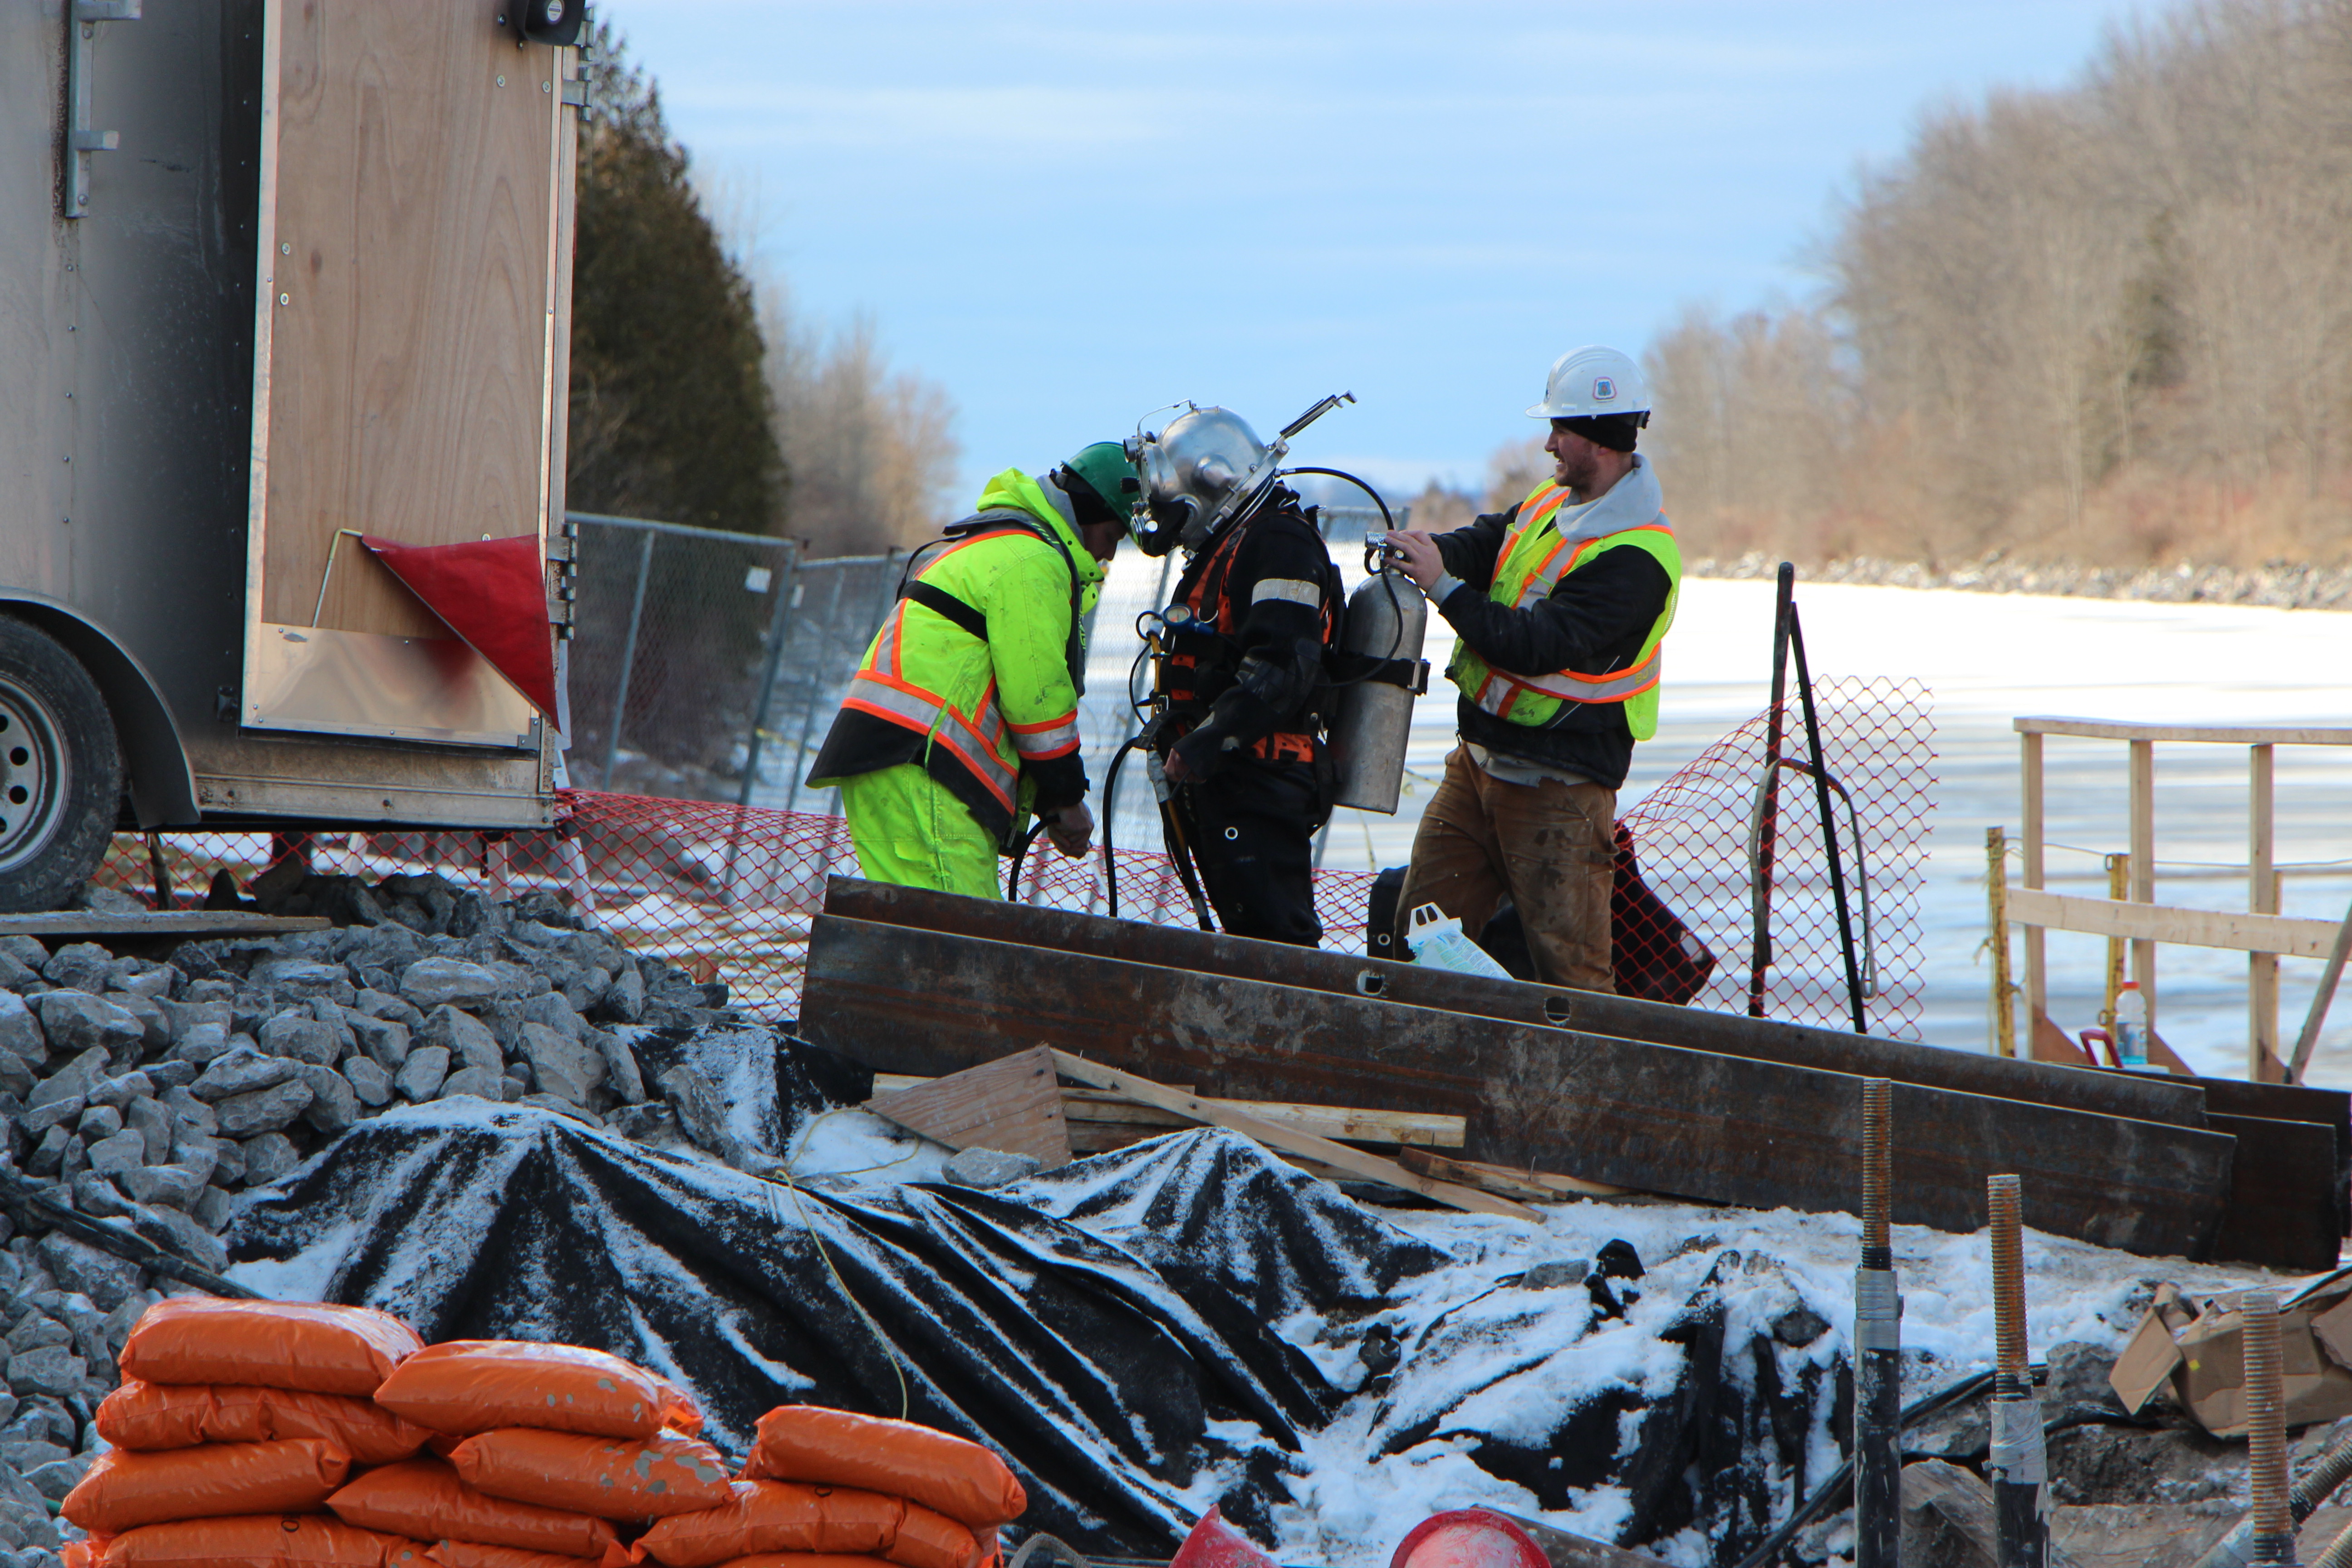 A snowy construction site. Two people help to check the equipment of a hardhat diver.